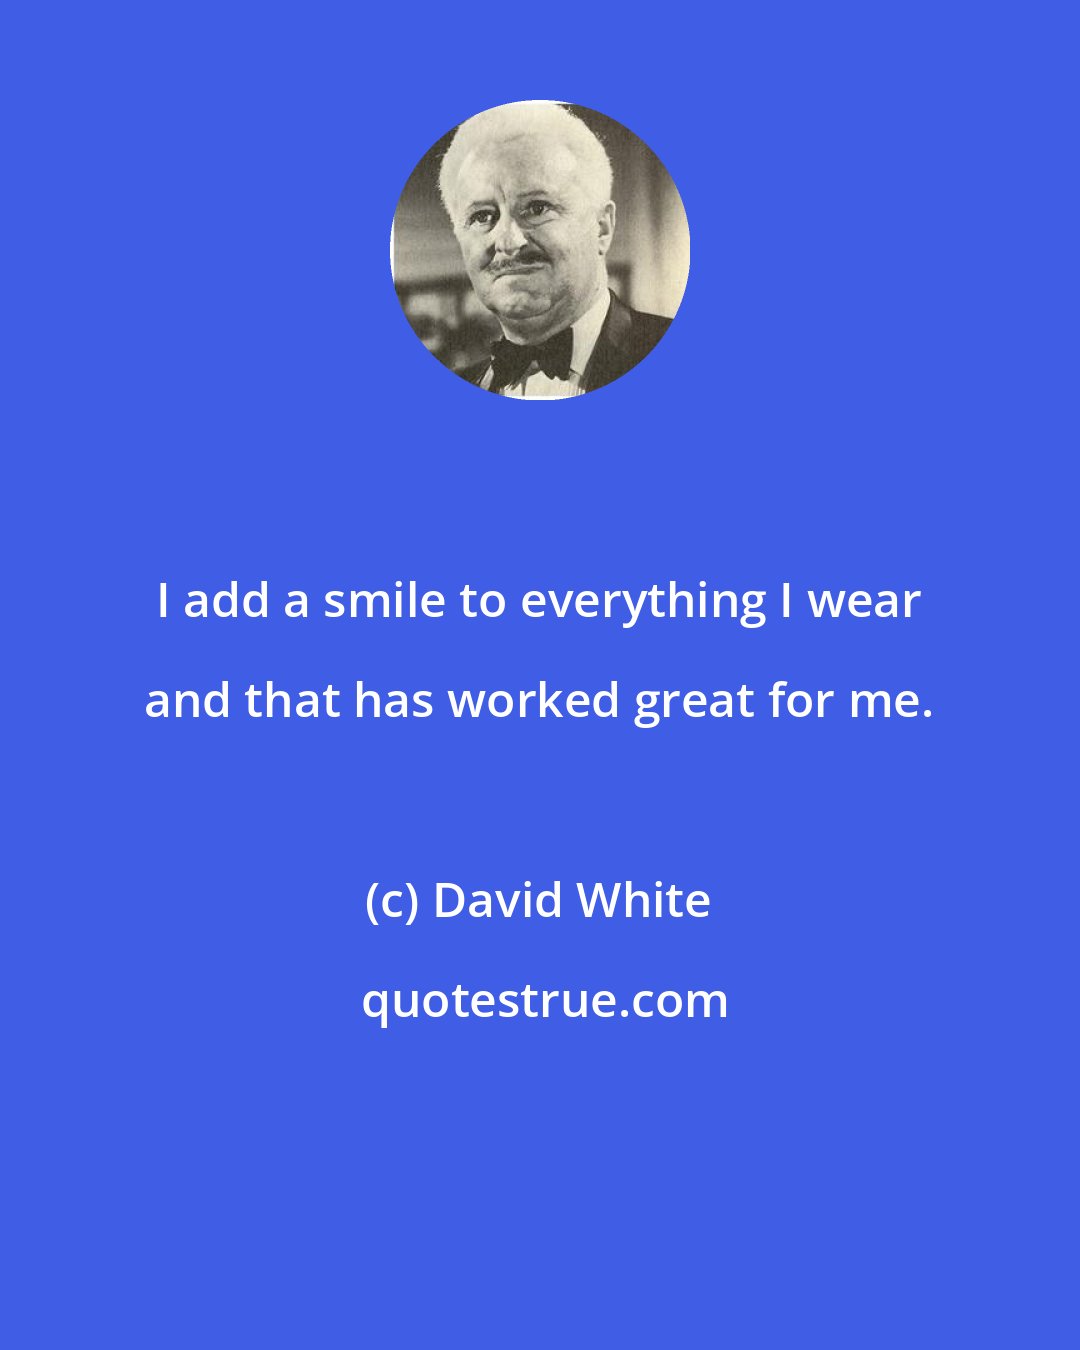 David White: I add a smile to everything I wear and that has worked great for me.